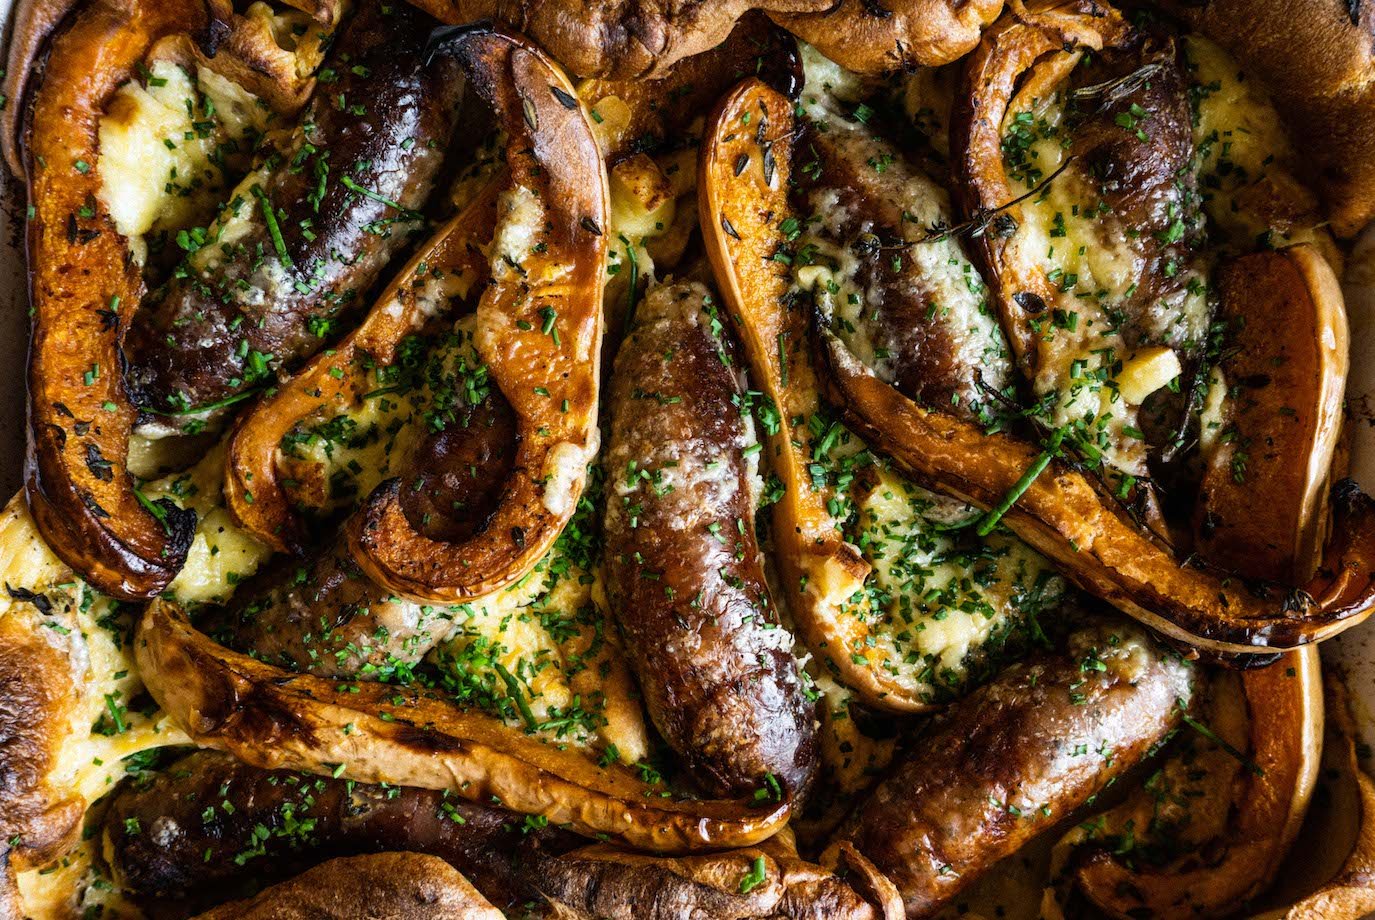 Toad in the hole with baked squash, Cumberland sausages and smoked Quickes cheddar, with onion gravy
